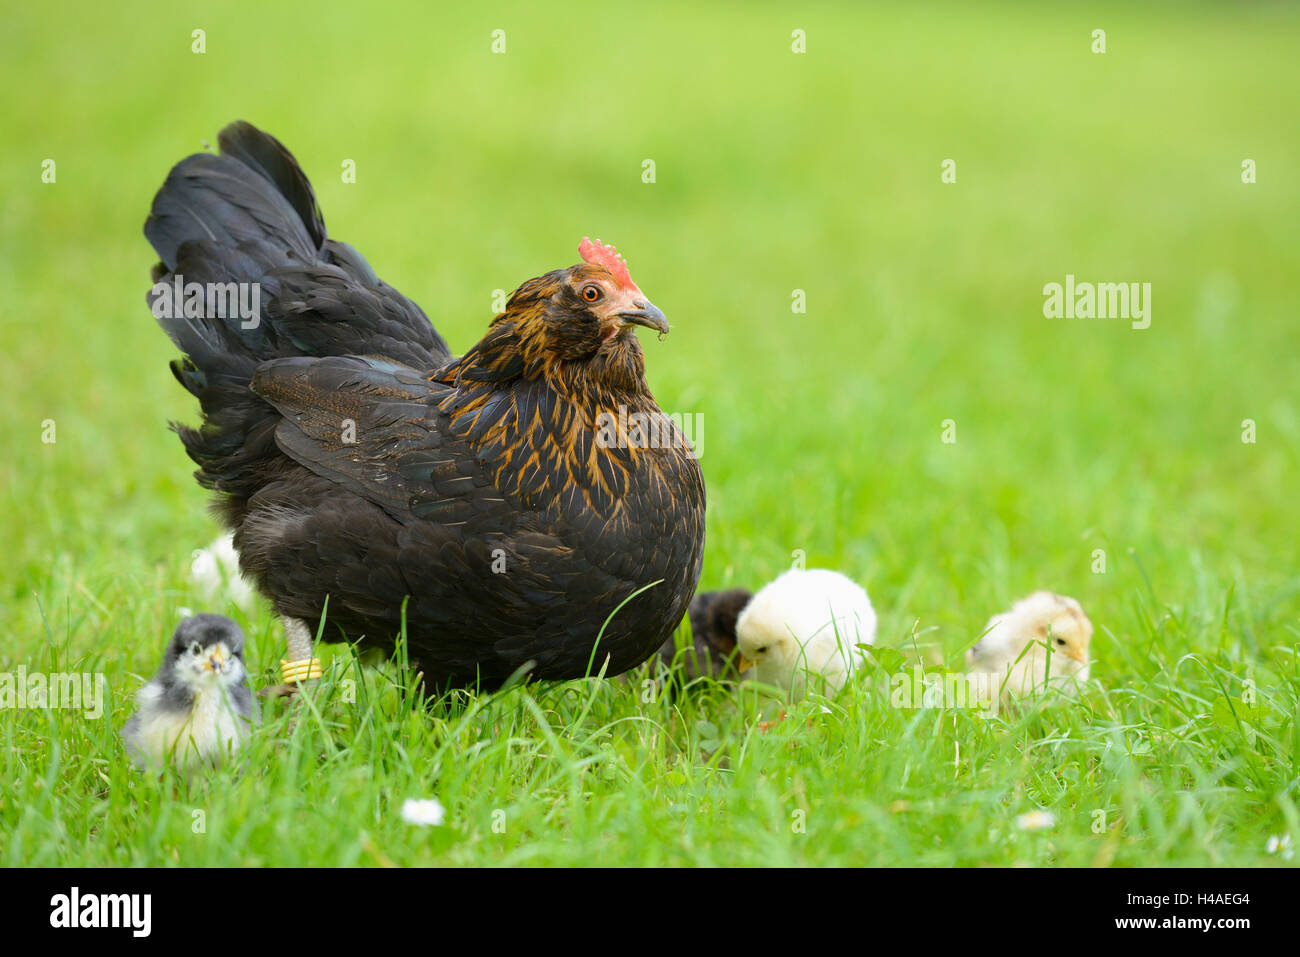 House chicken, Gallus gallus domesticus, Clucking, Fledgling, Meadow, side view, standing, Stock Photo